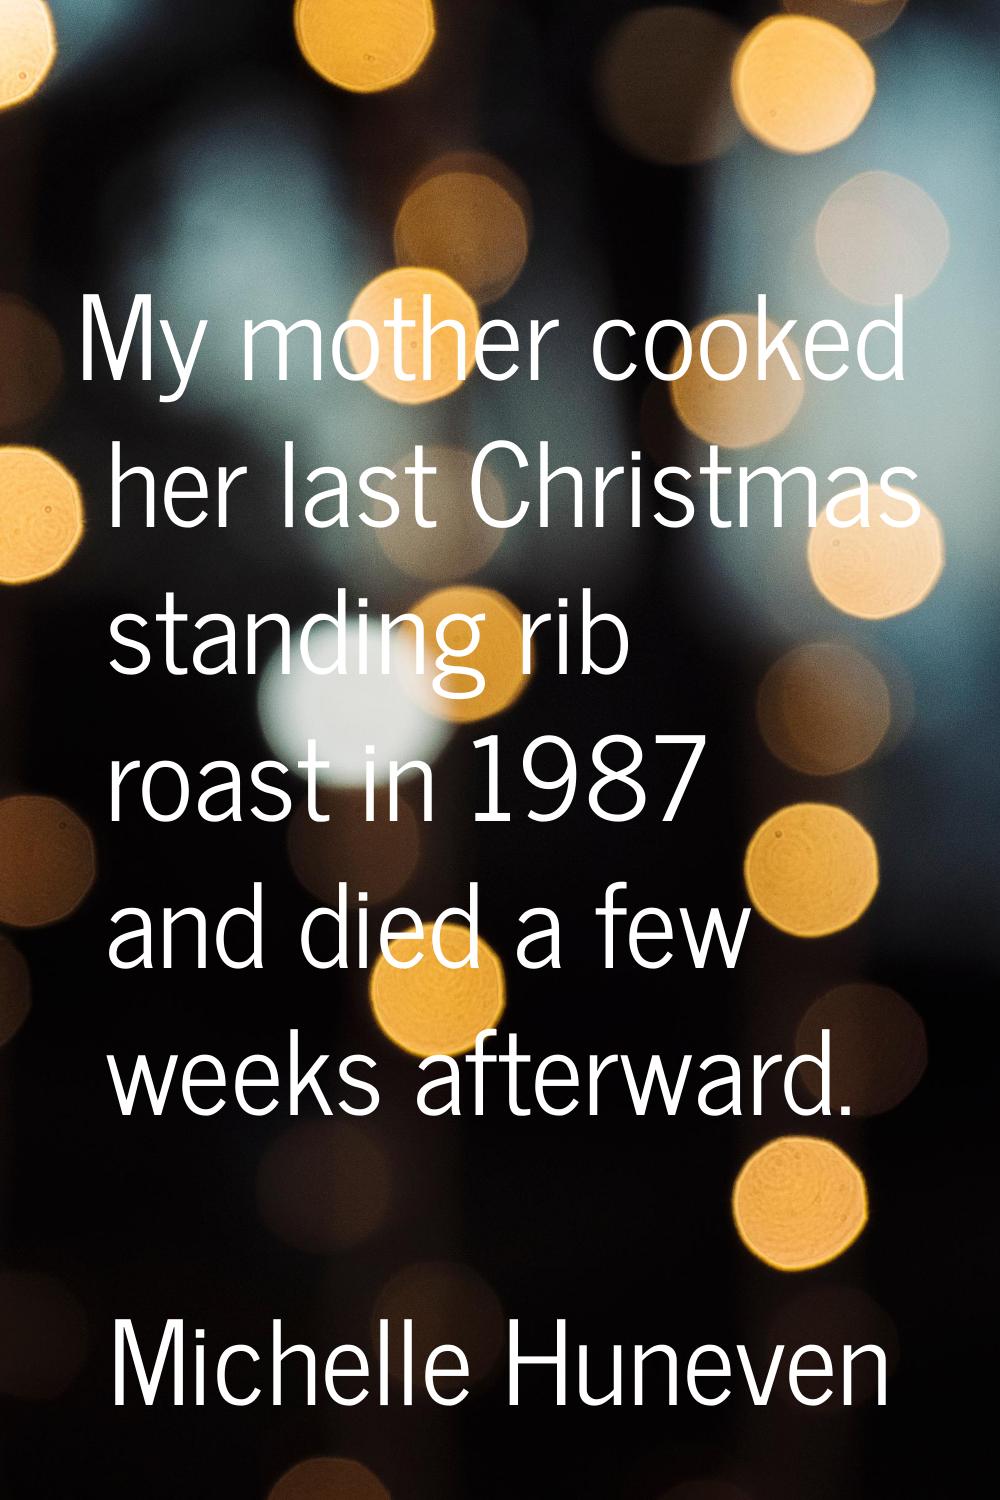 My mother cooked her last Christmas standing rib roast in 1987 and died a few weeks afterward.